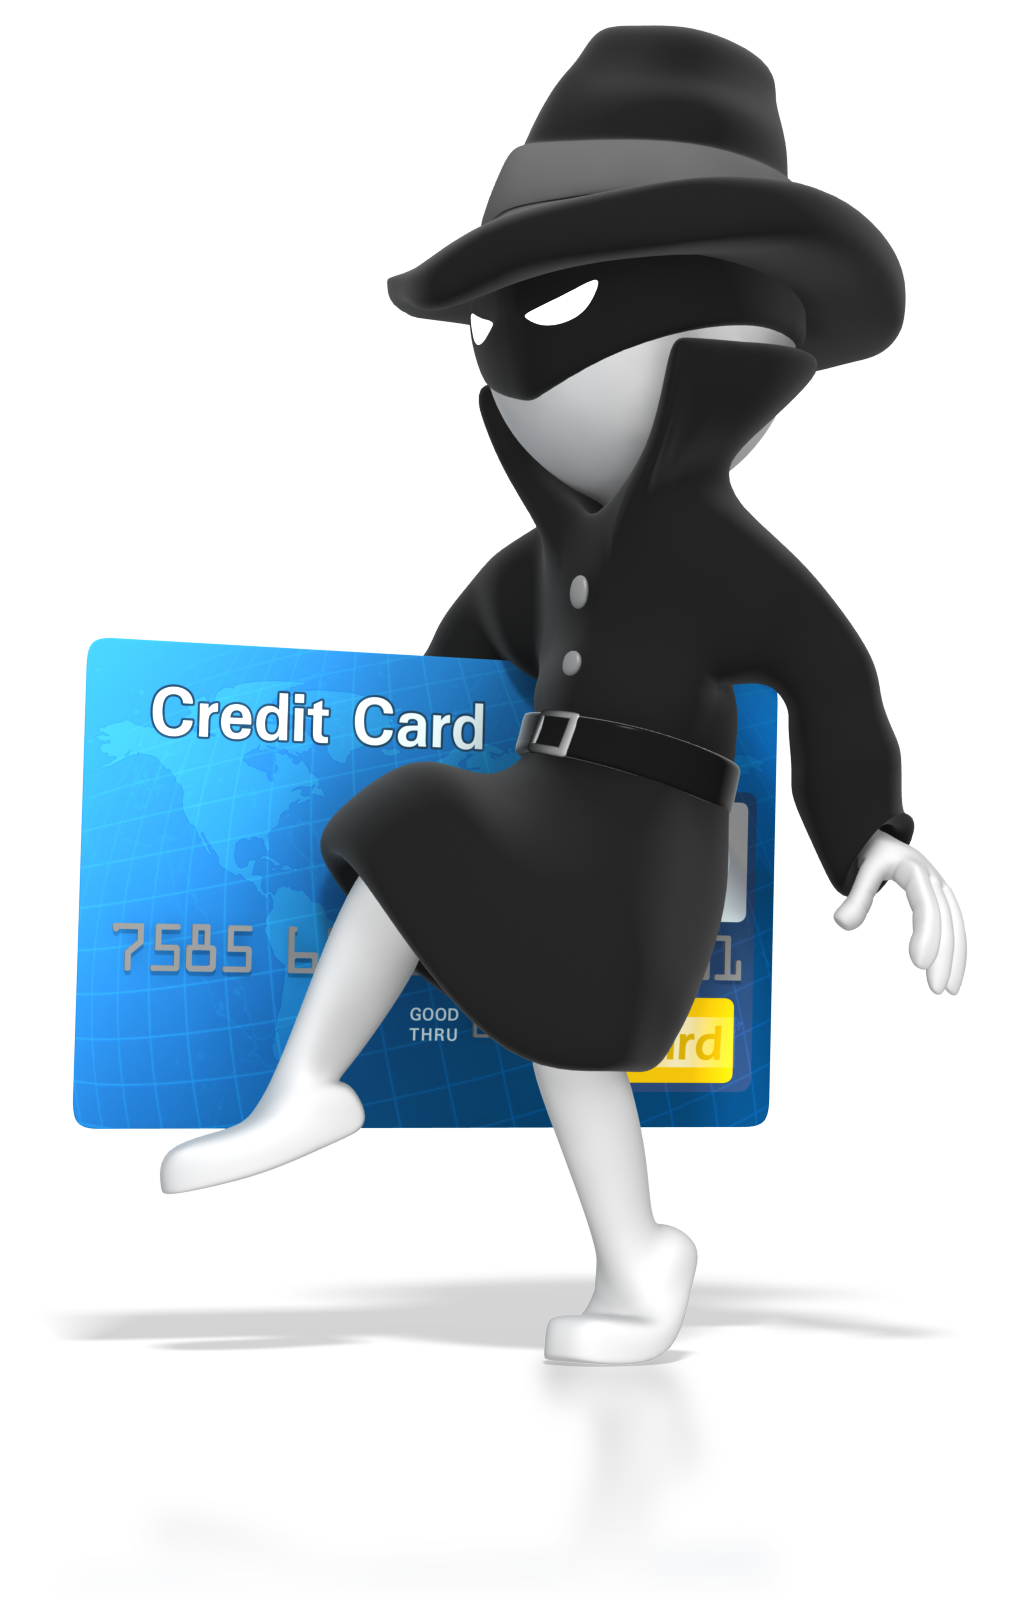 Banks ignore crypto checks in credit card transactions. Standards are